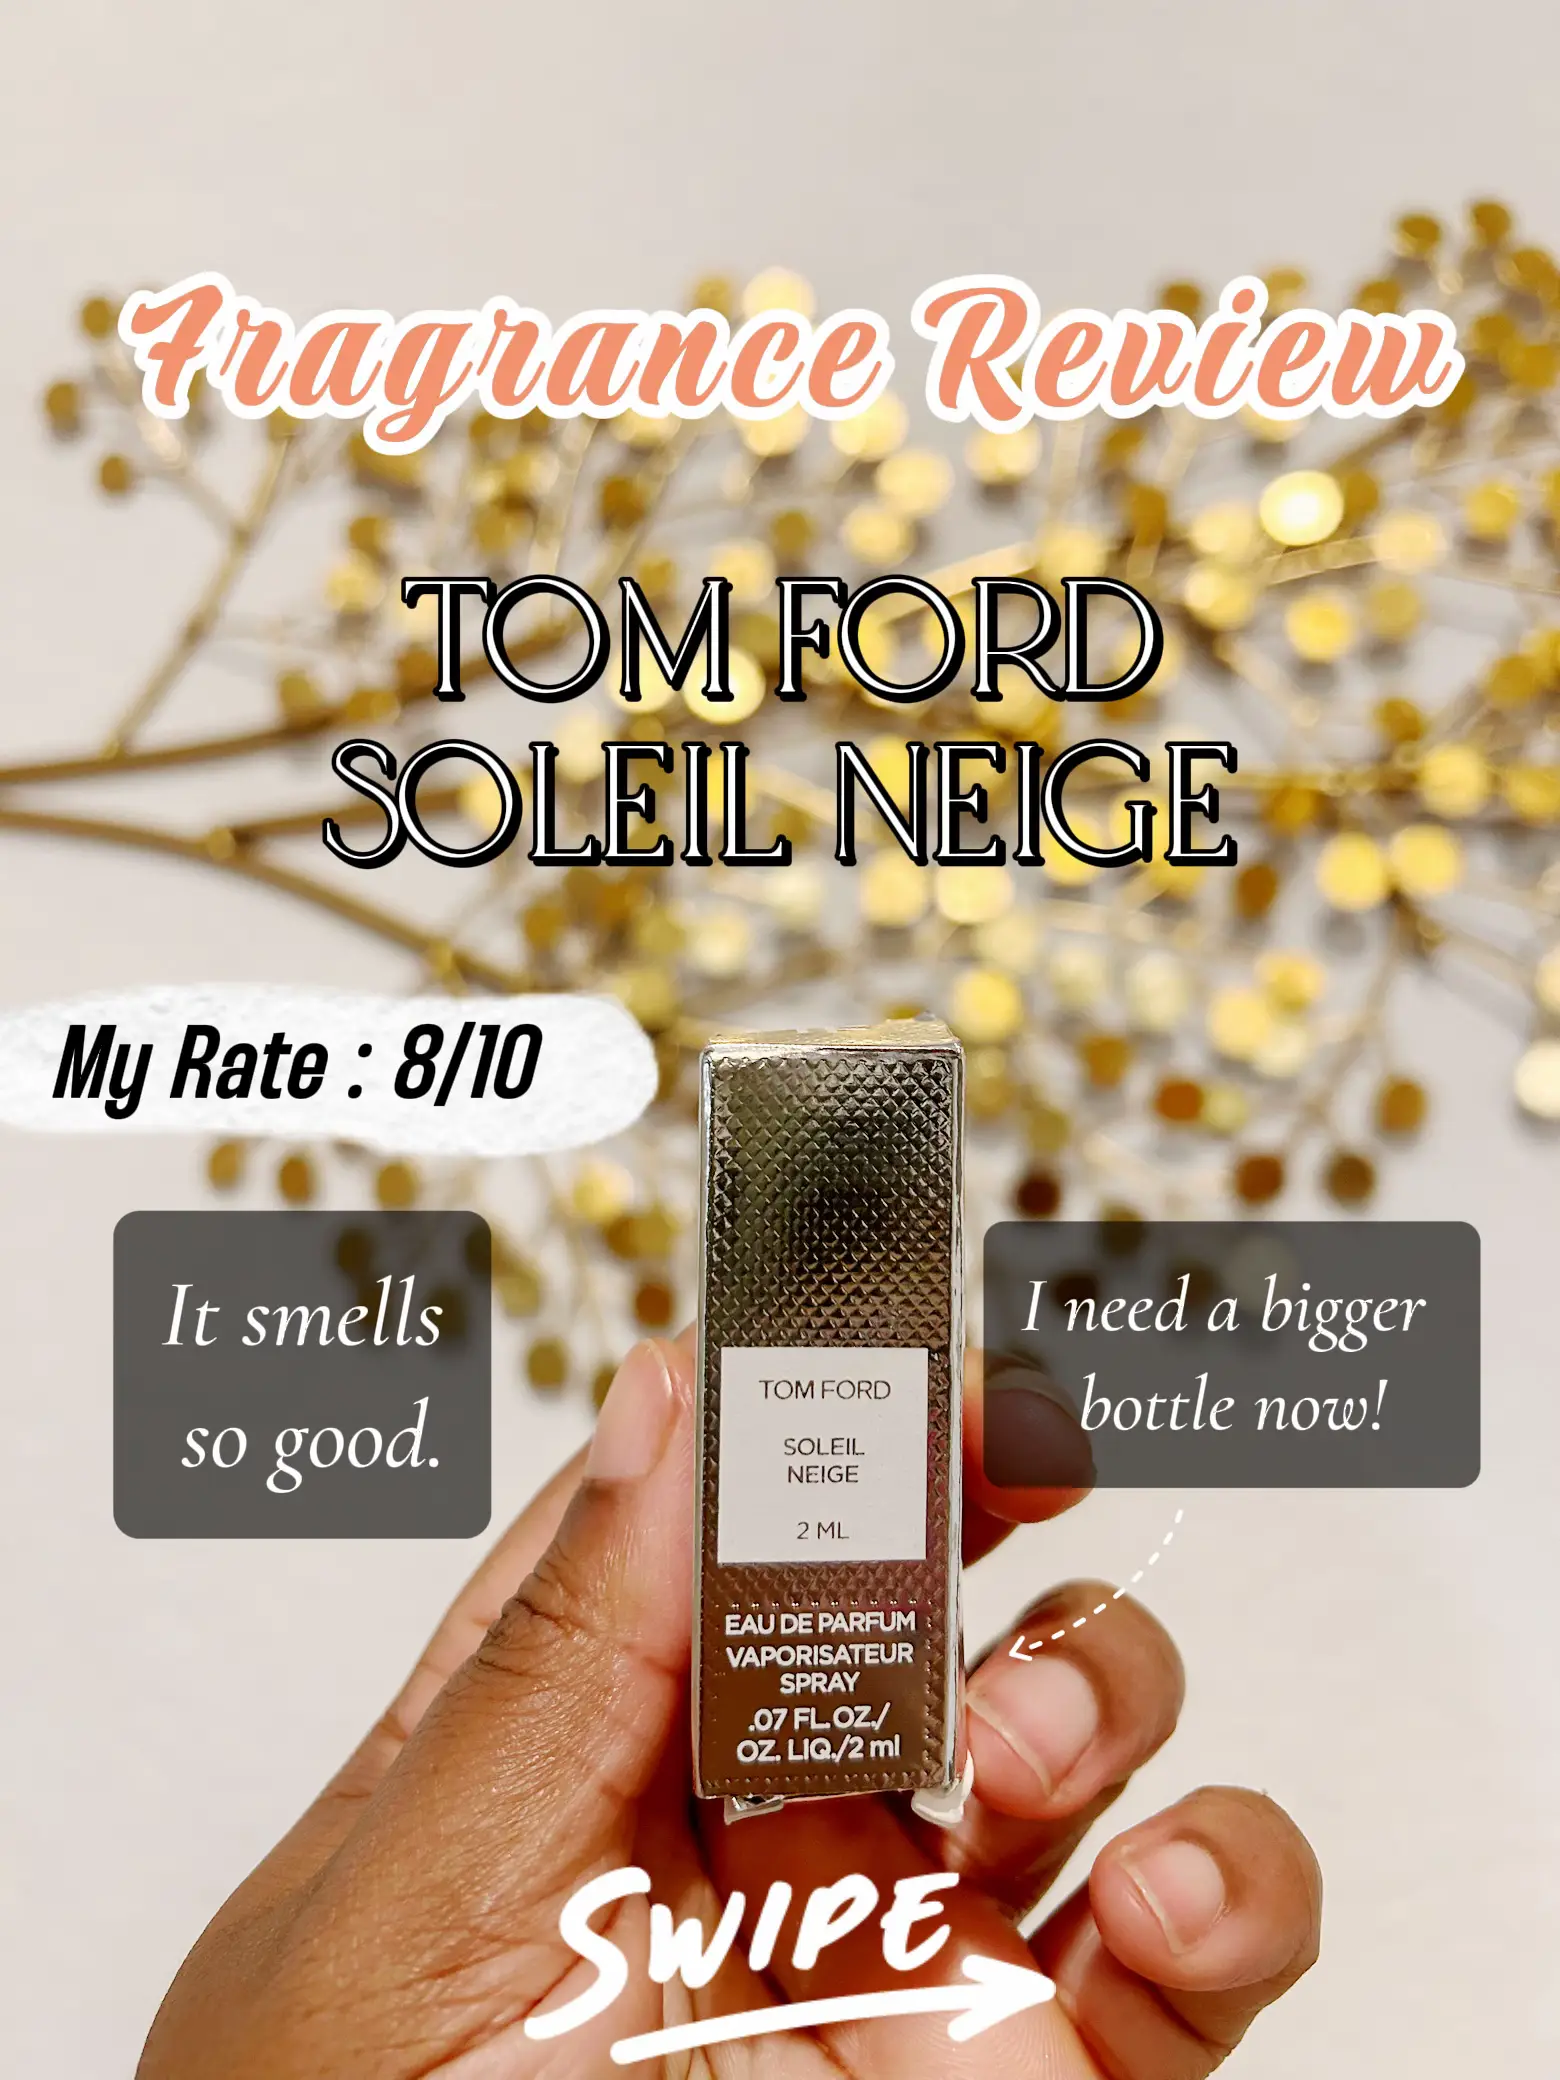 Tom Ford's Lost Cherry Perfume Review - Vibrant, Fun, But Worth It?